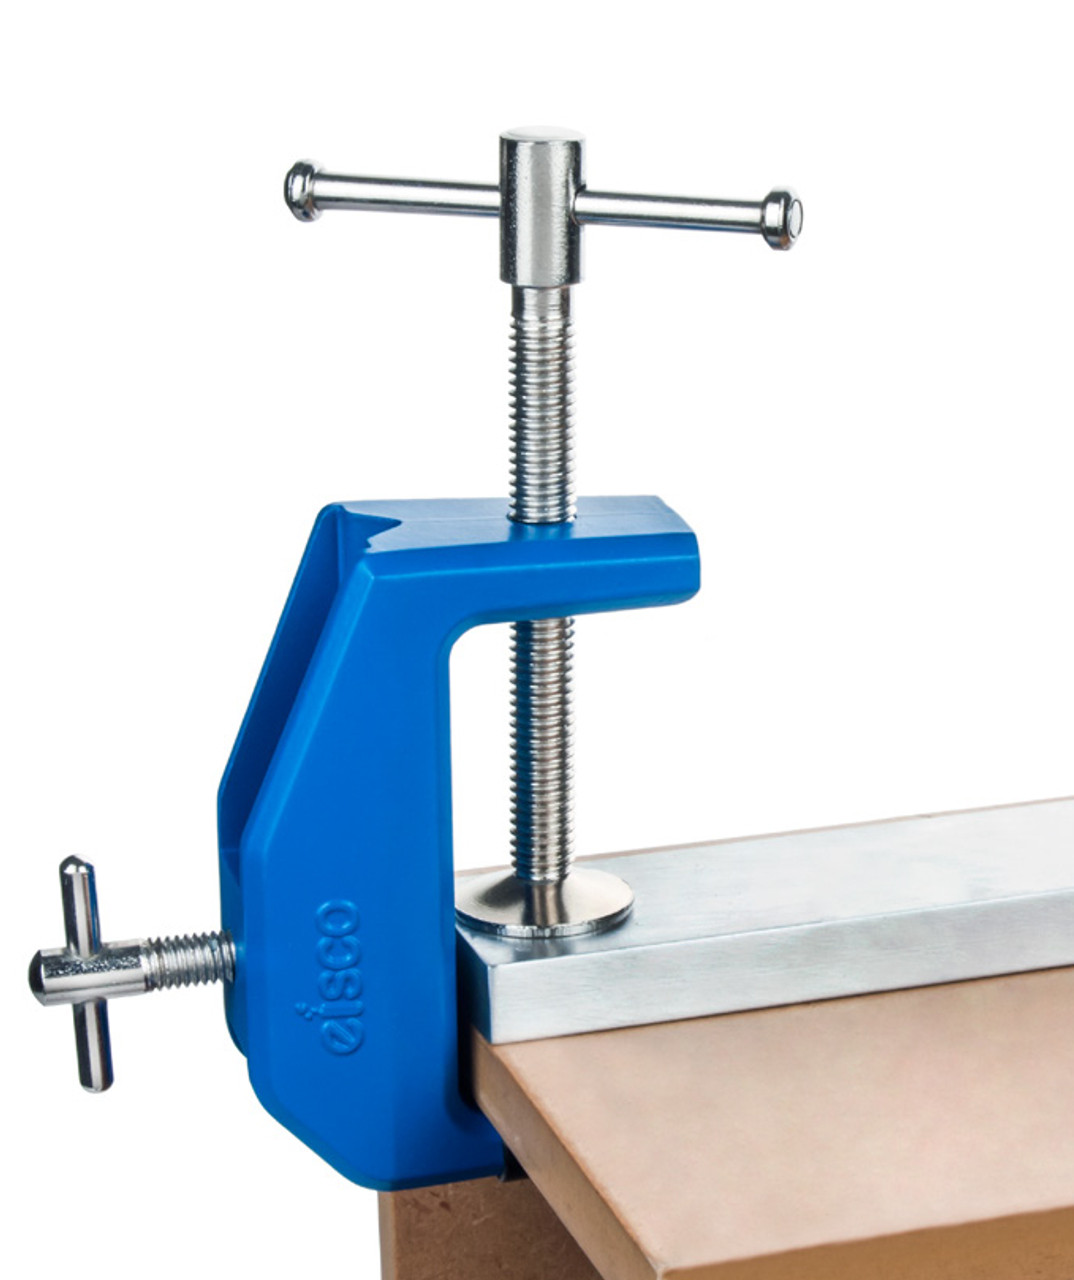 Heavy Duty Multi-Purpose Table Clamp, Vinyl Coated Grip and Swivel Pad,  Built-In Rod 